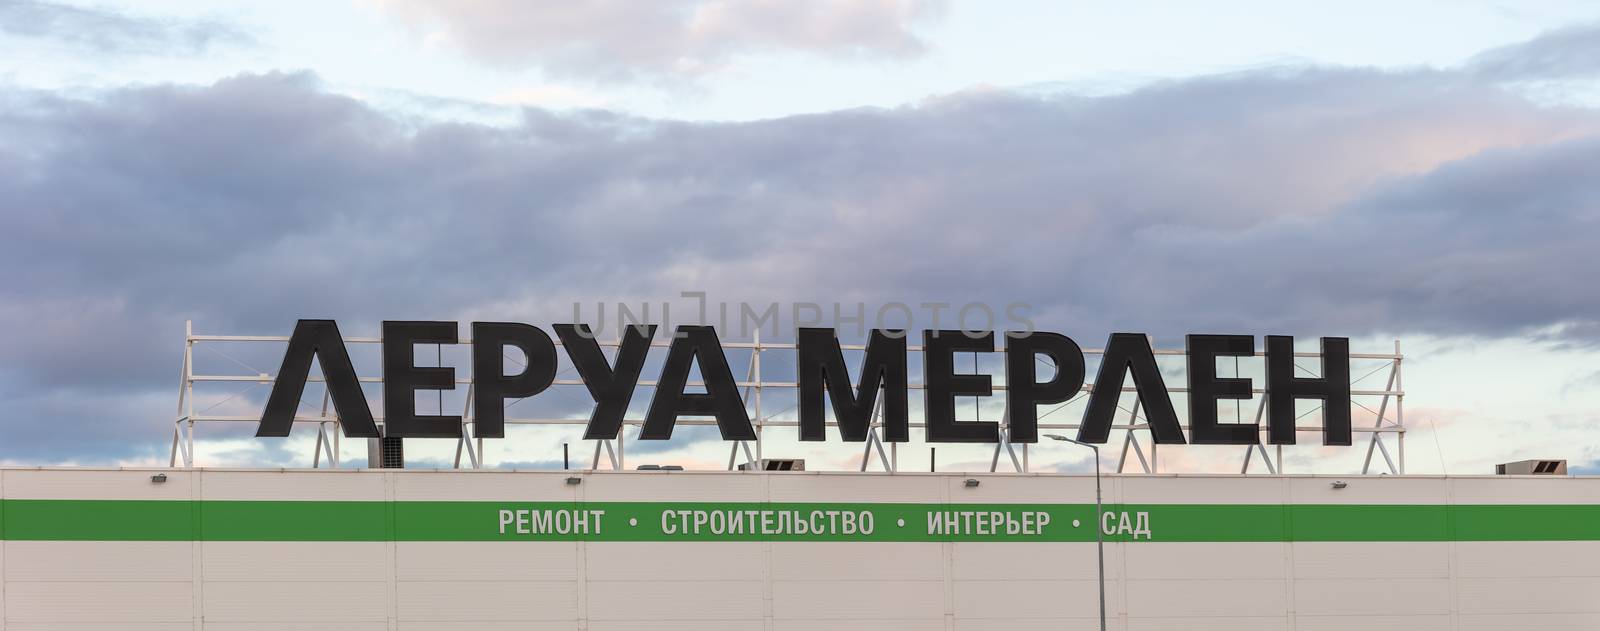 Panoramic shot of front sign in Leroy Merlin store by DamantisZ